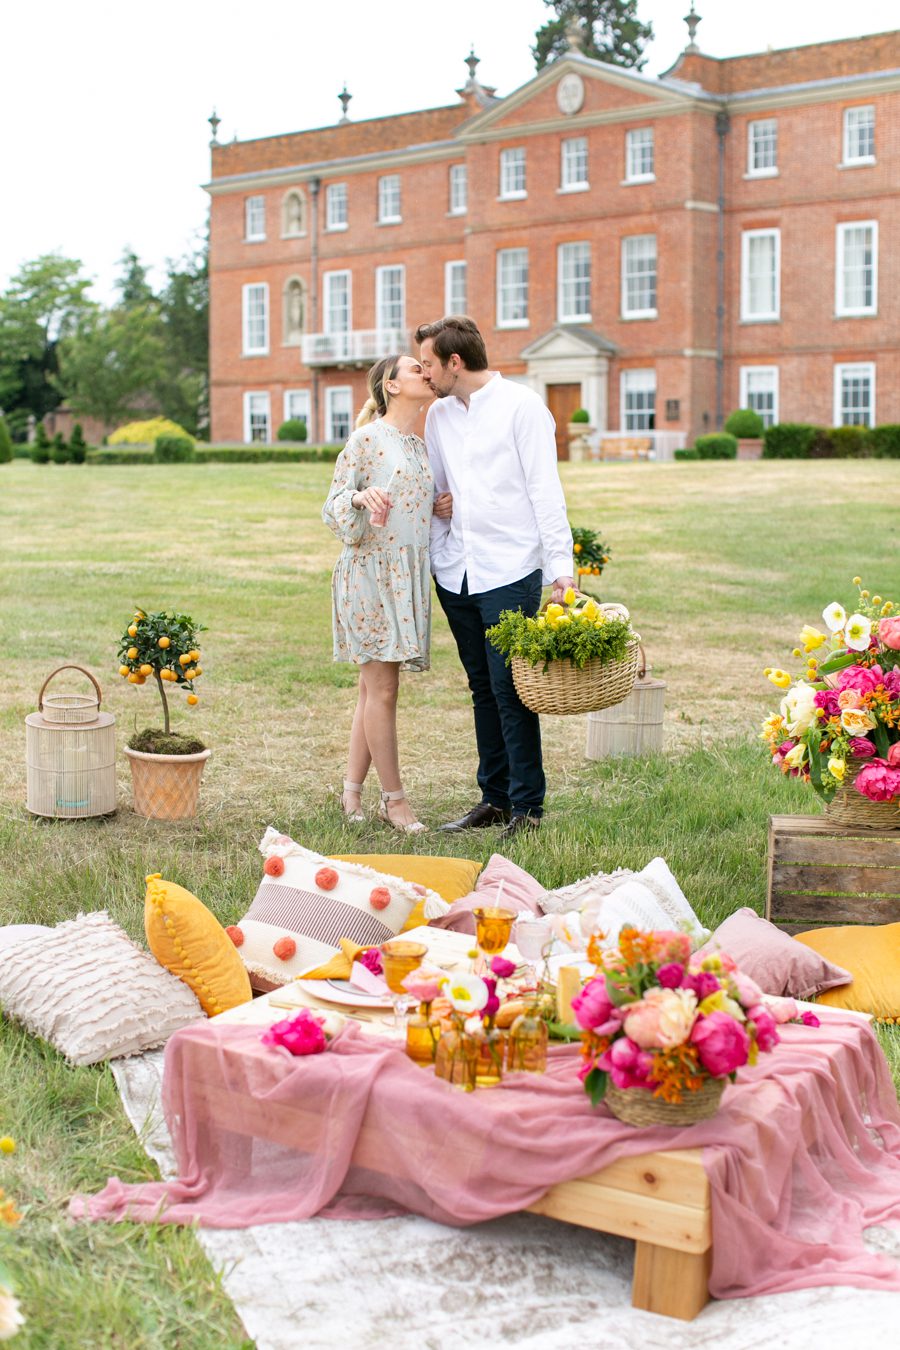 How to propose to your girlfriend at The Four Seasons Hampshire